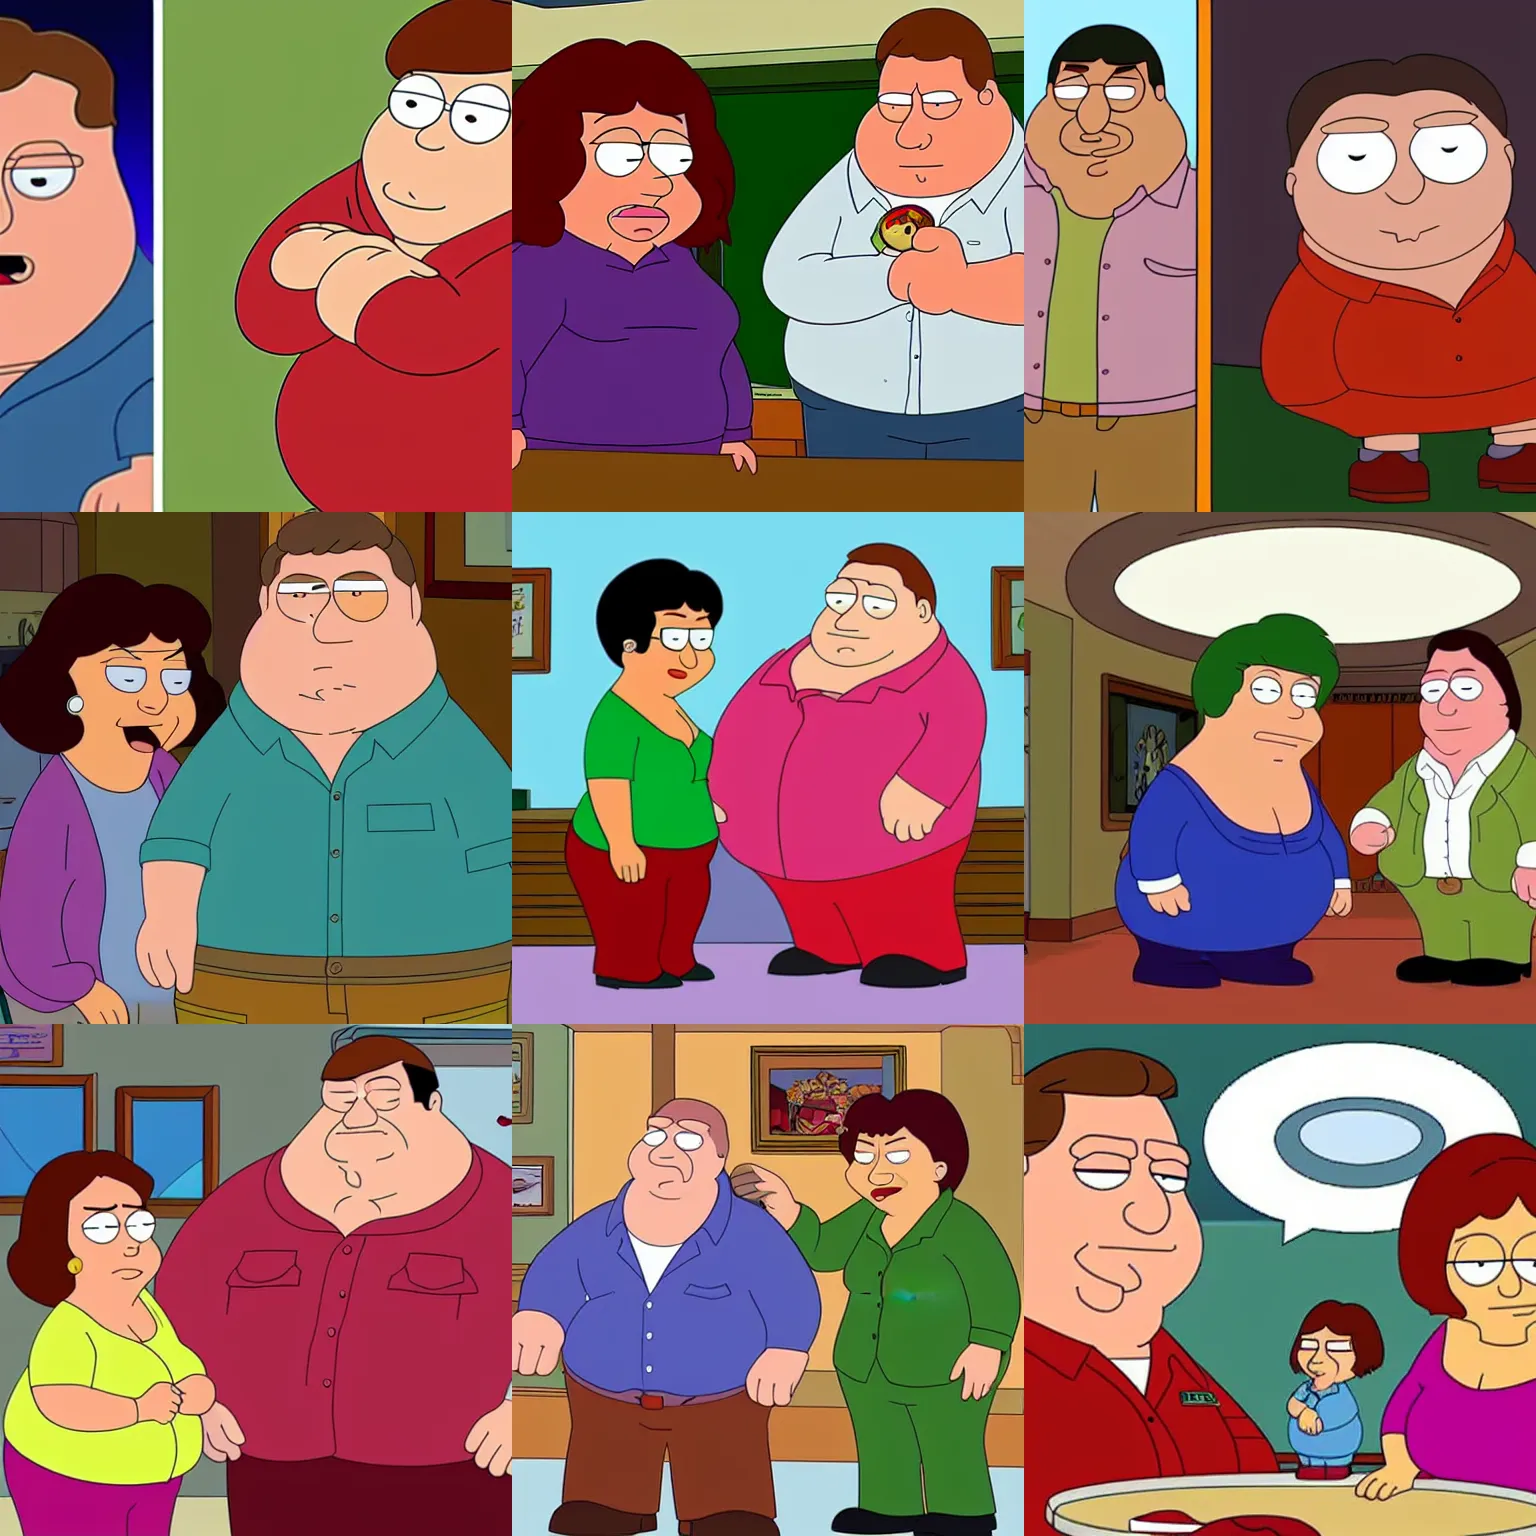 Prompt: John Goodman and Roseanne Barr in an episode of Family Guy